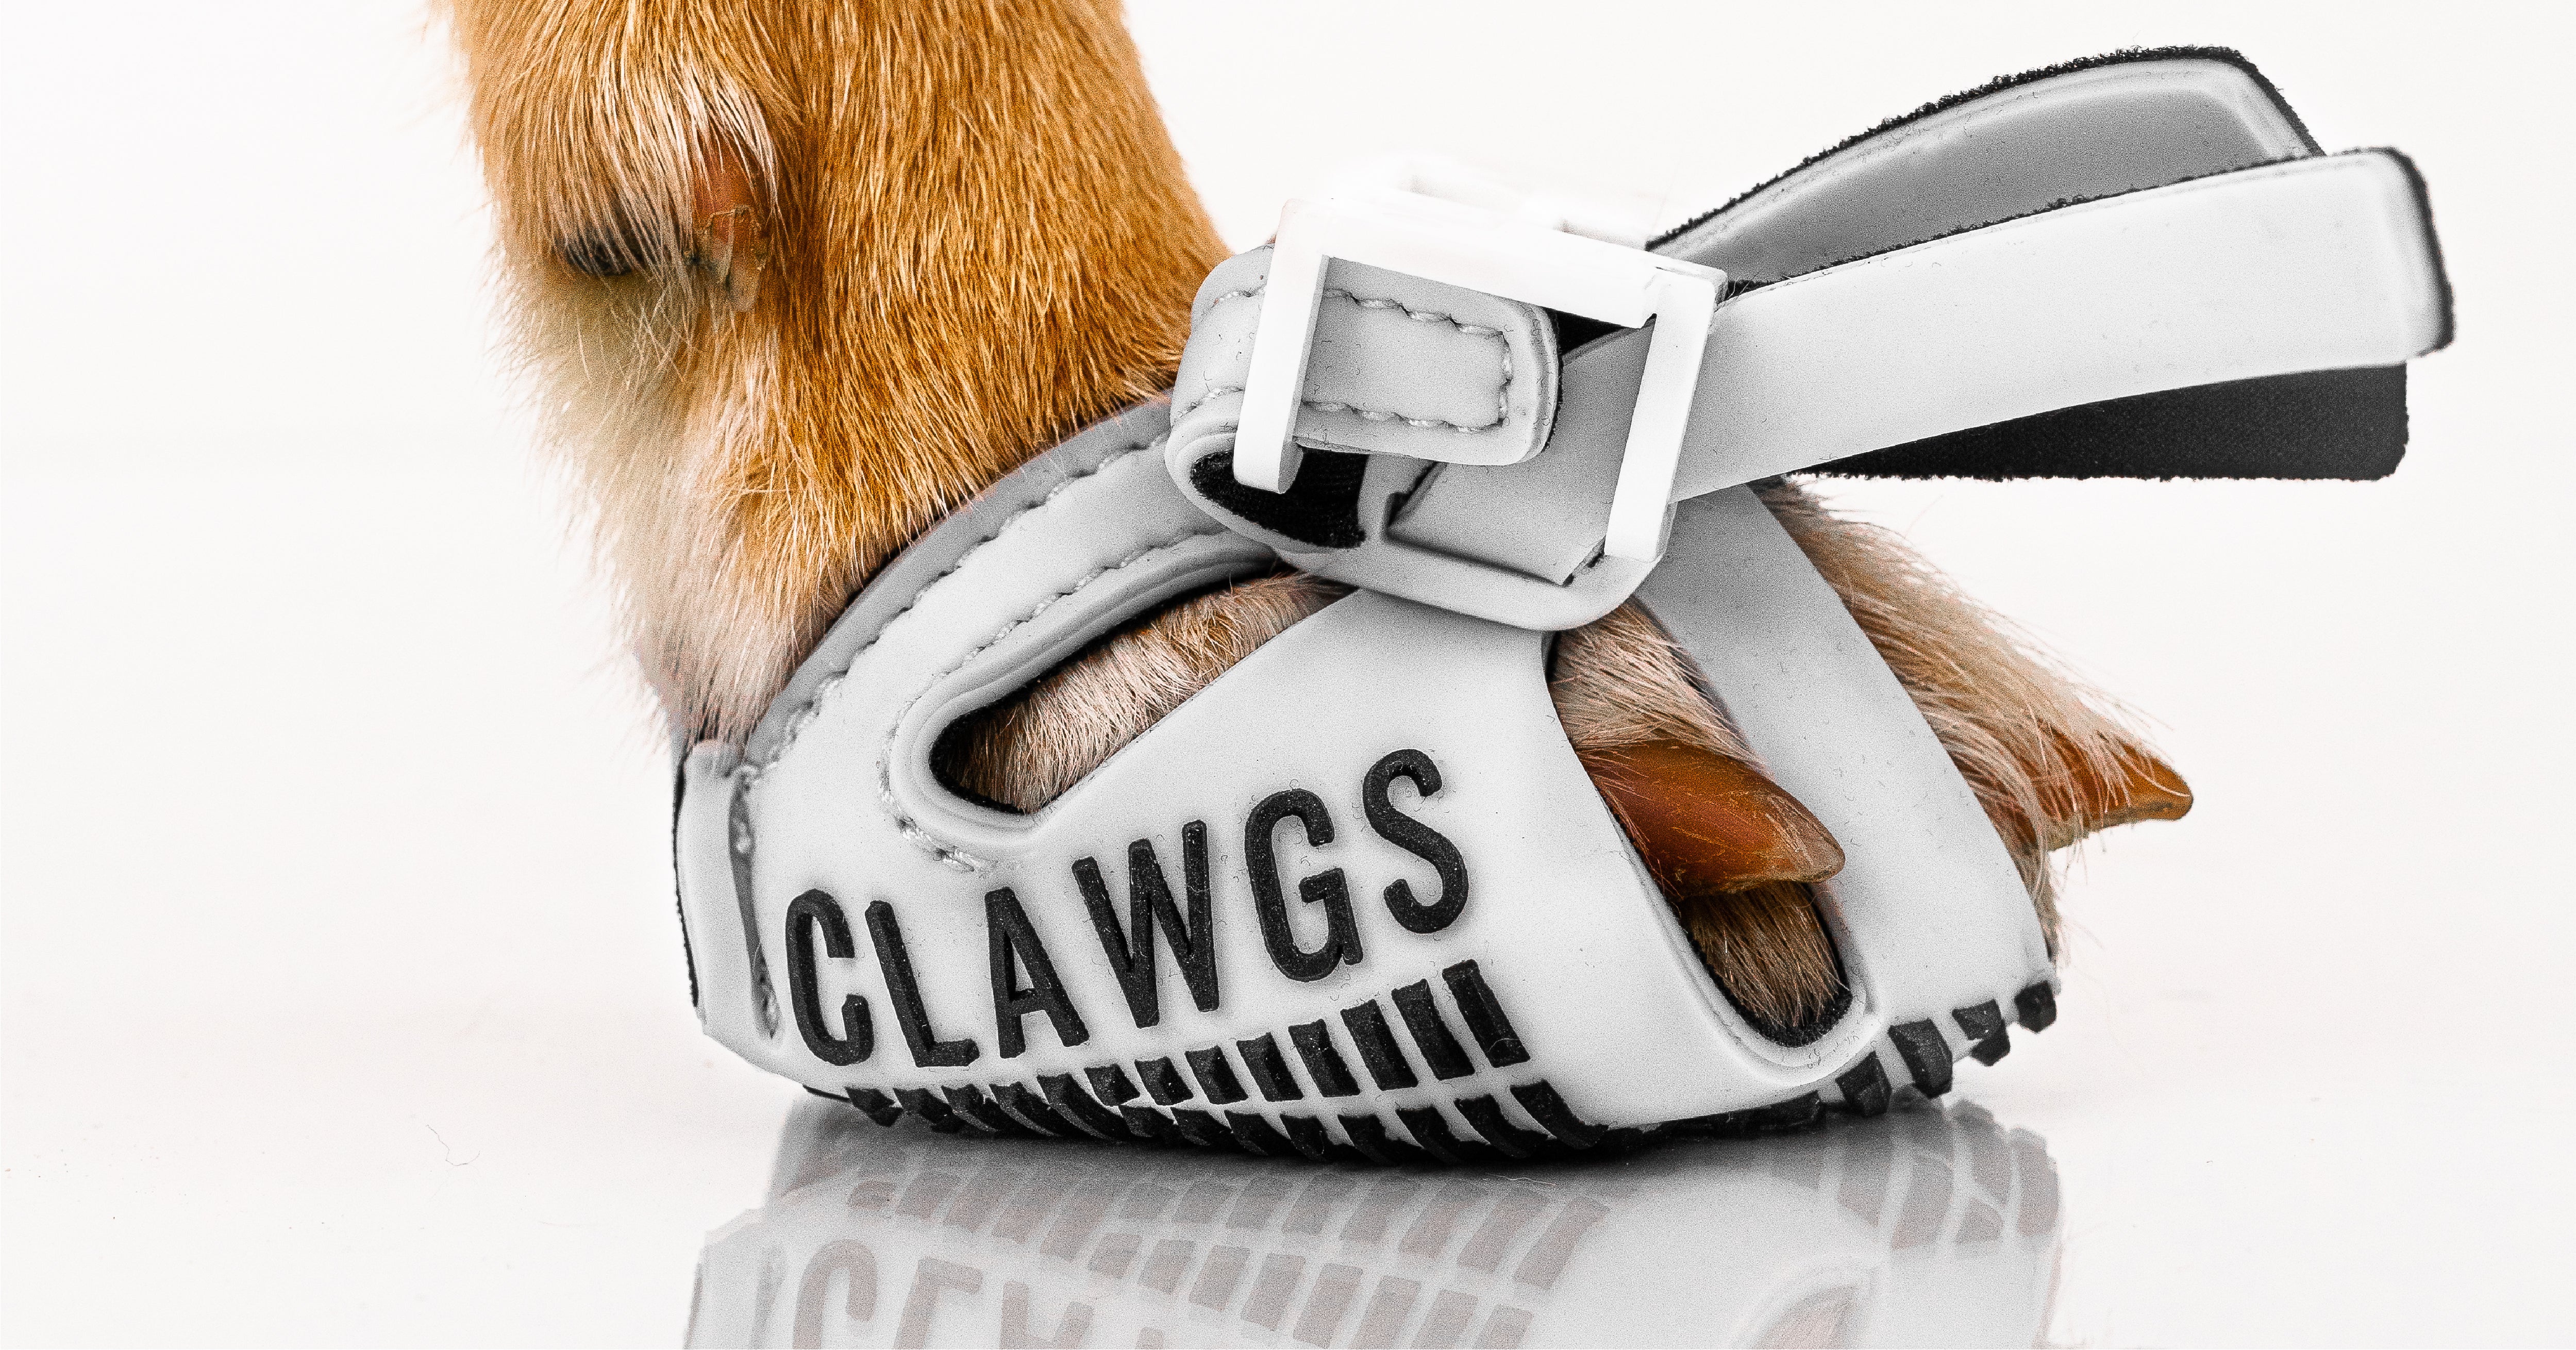 CLAWGS Flexible Measuring Tape Sizing Demonstration 